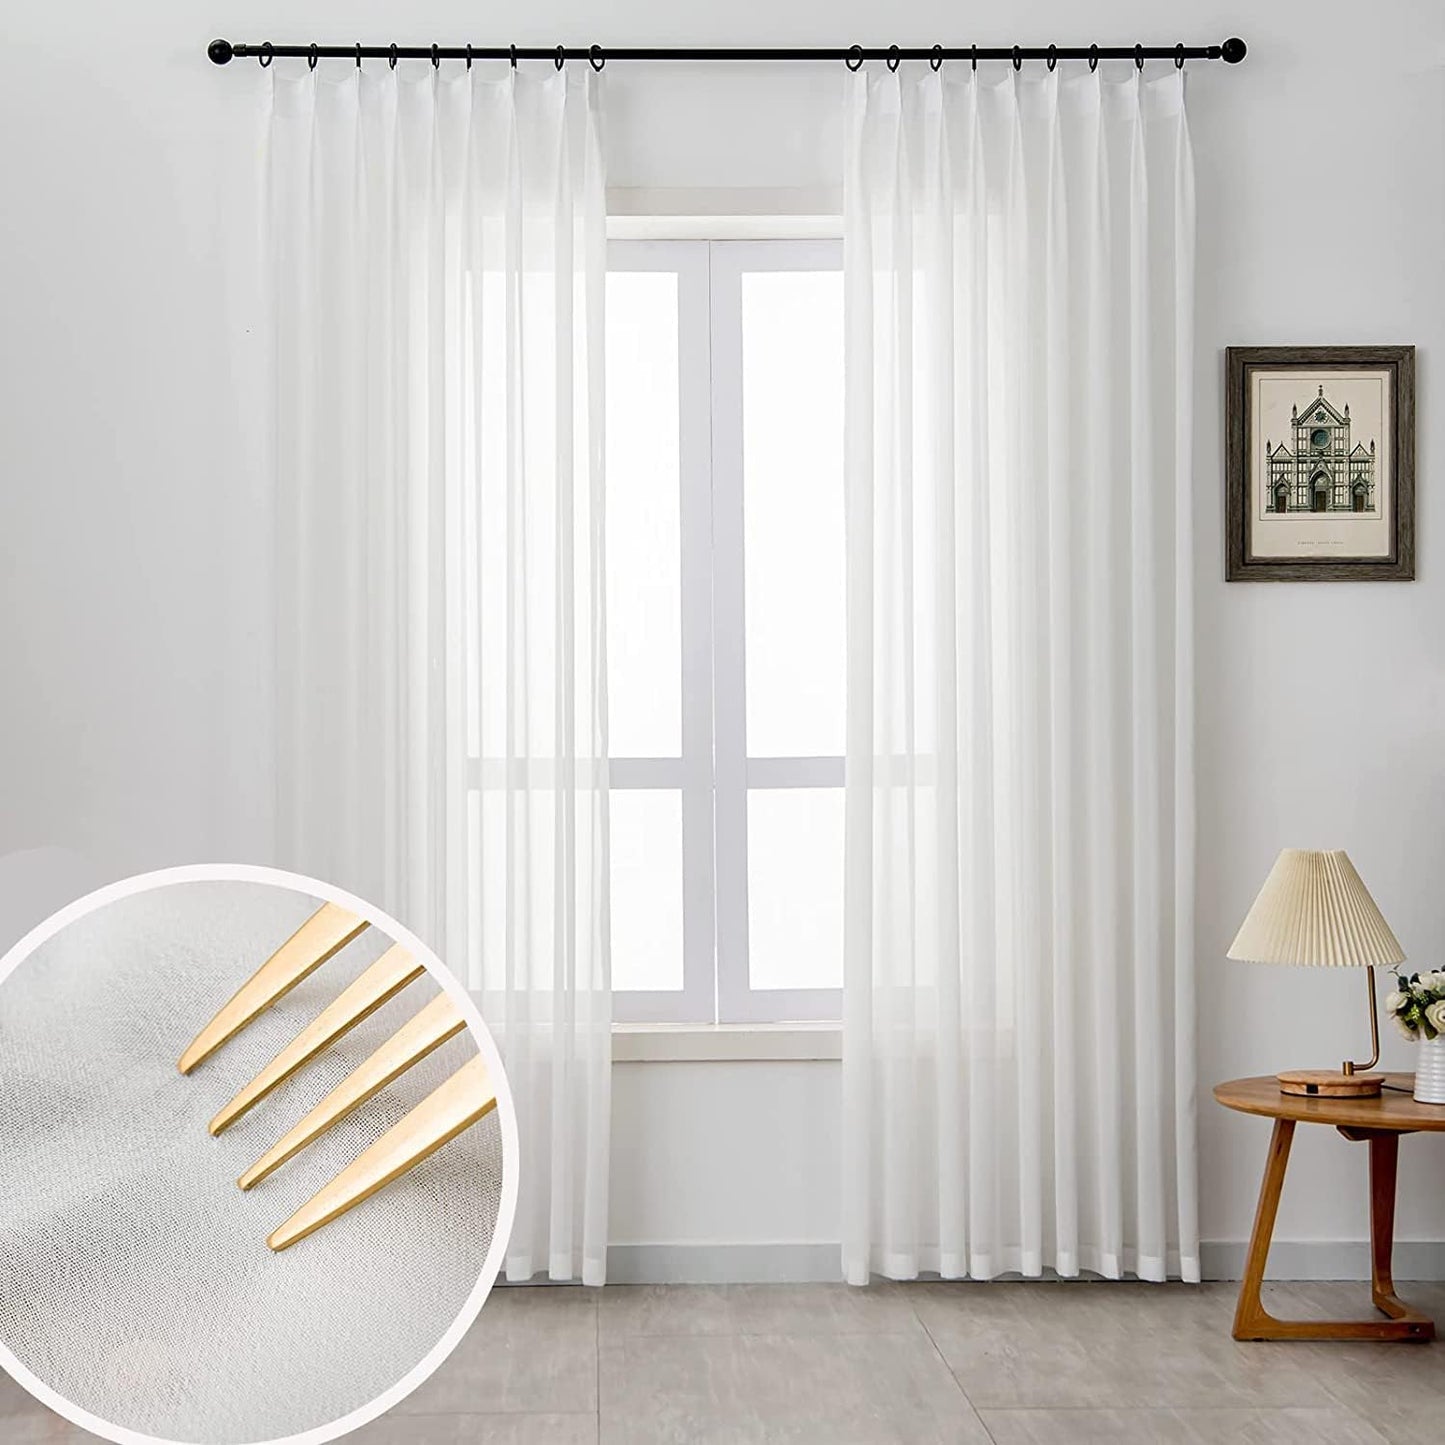 LUGOTAL Pinch Pleated Drapes 108 Inches Long 1 Panel off White Chiffon Sheer Curtains for Living Room and Bedroom Semi-Sheer Light Filtering Curtains & Drapes for Sliding Glass Door, W52 X L108  LUGOTAL Off White (W40" X L102")*1 Panel 